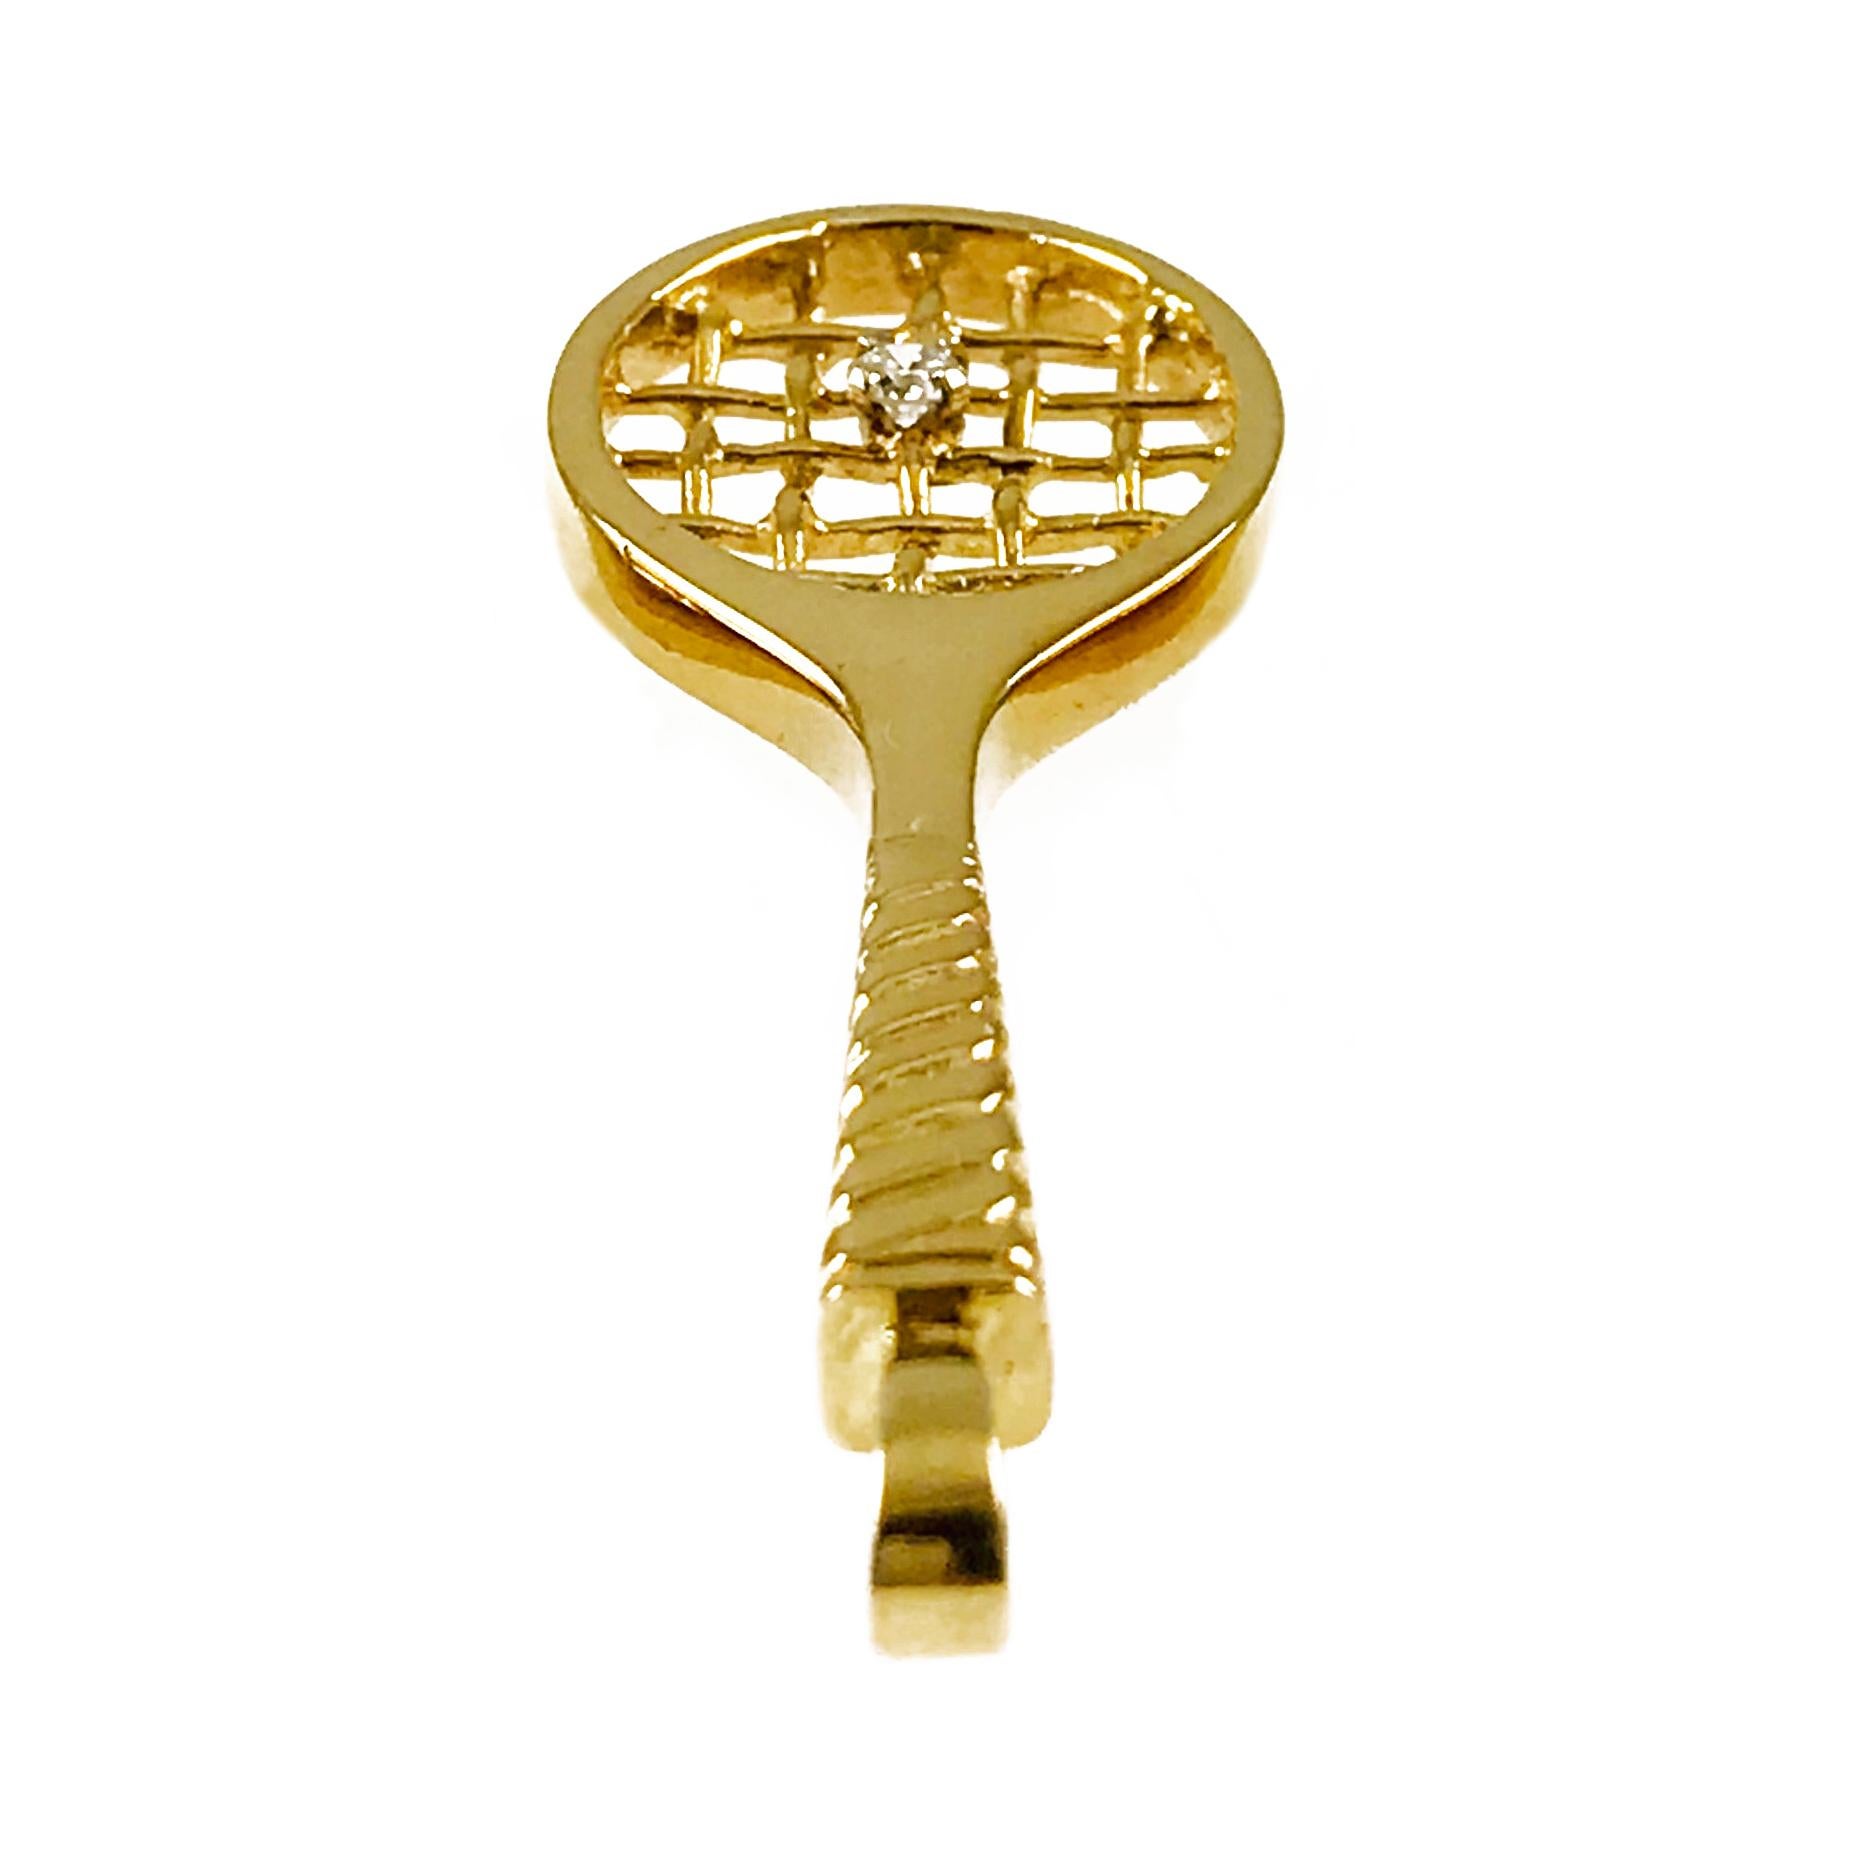 Incogem 14 Karat Yellow Gold Diamond Tennis Racket Pendant. Serving up some fun on this piece, if you love the game you'll love this darling pendant. The pendant is meticulously handcrafted of 14k yellow gold, so much detail in the handle and in the